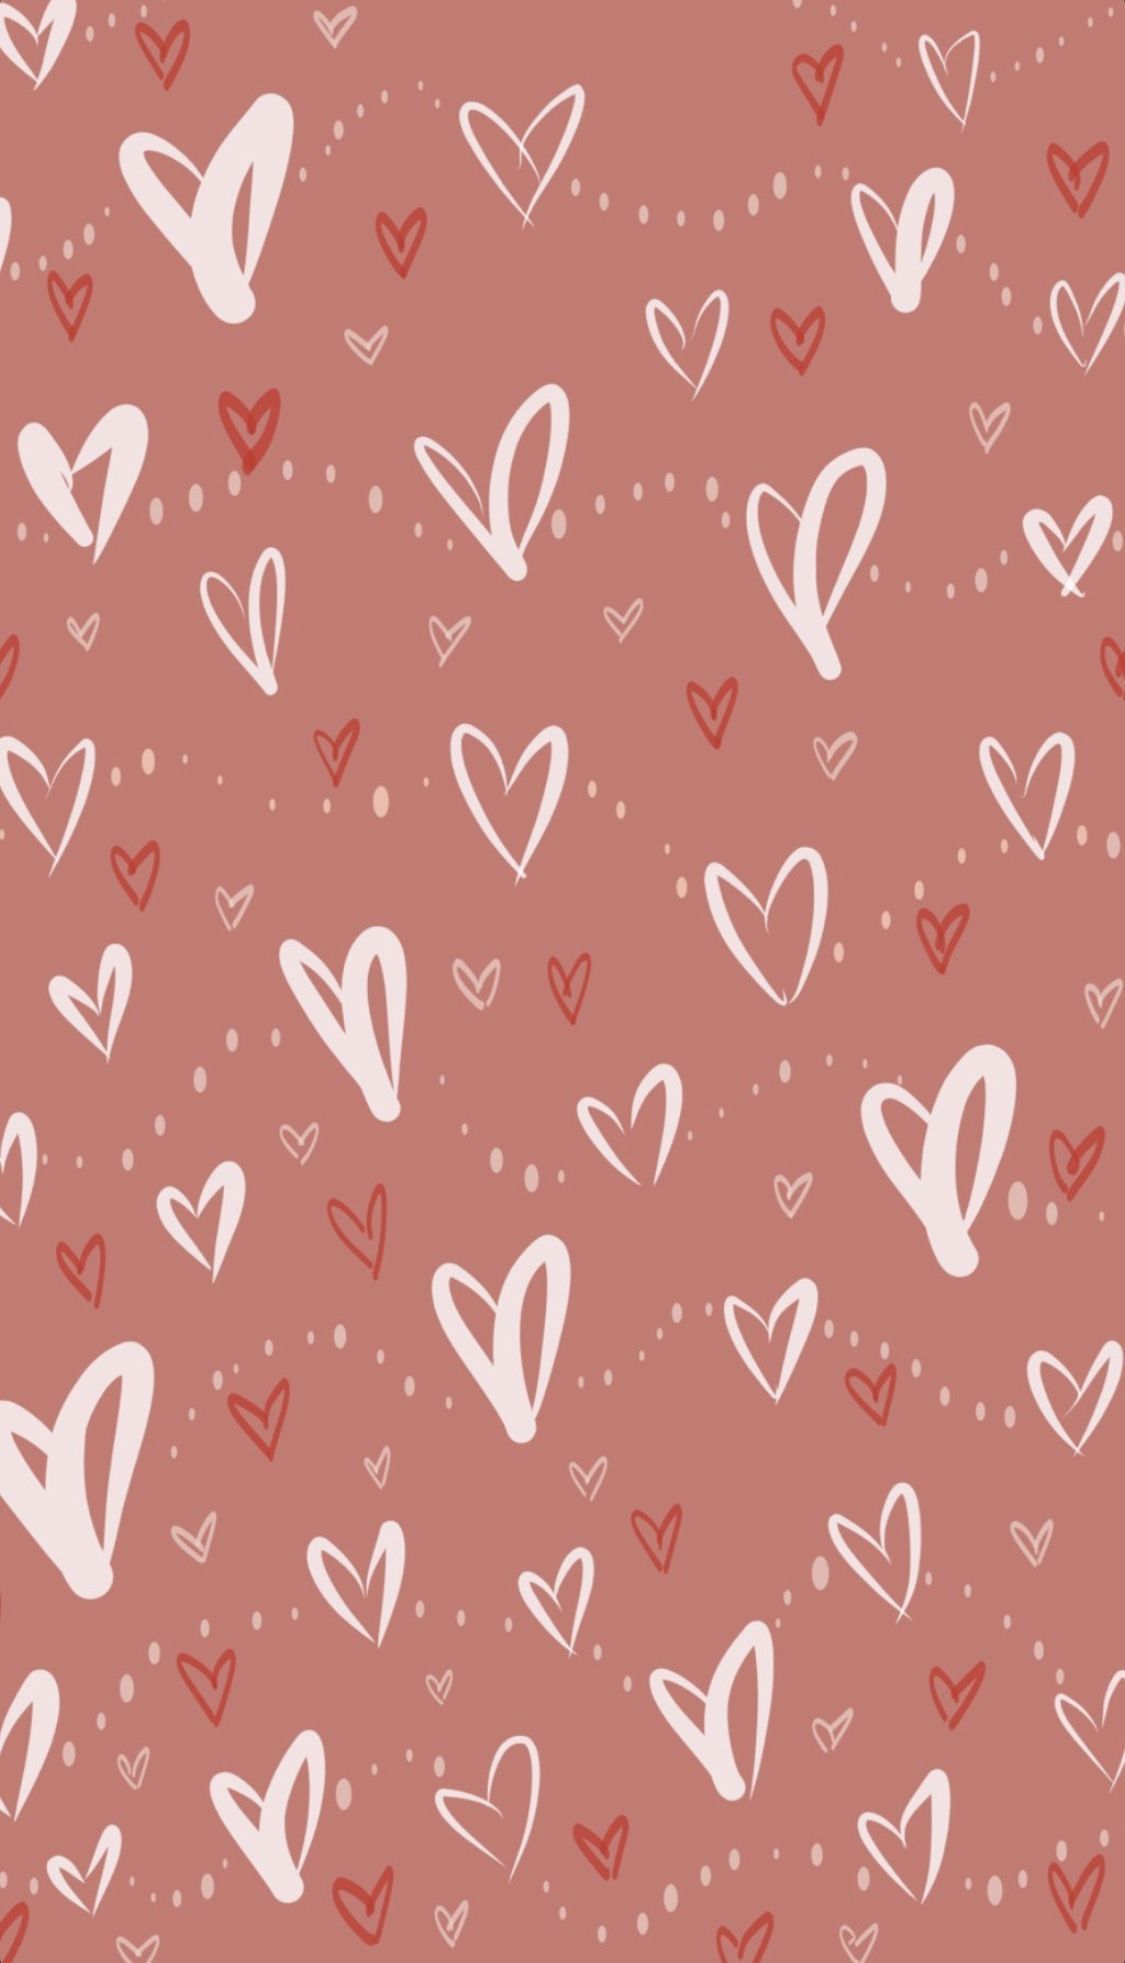 A pattern of hearts on pink background - Valentine's Day